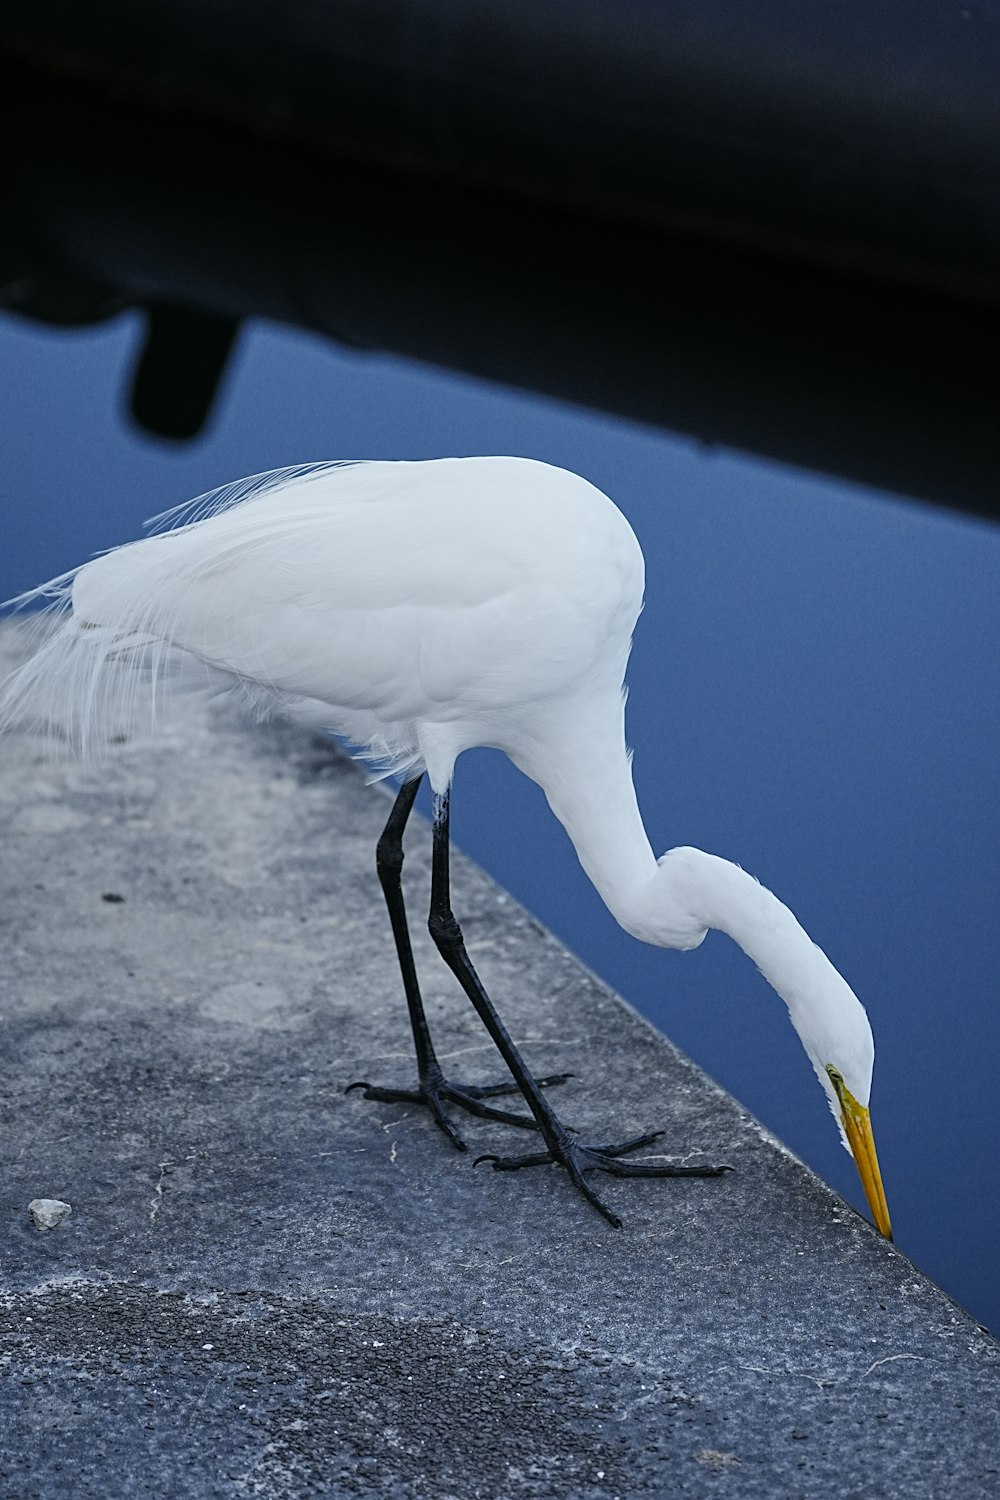 a white bird is standing on a ledge